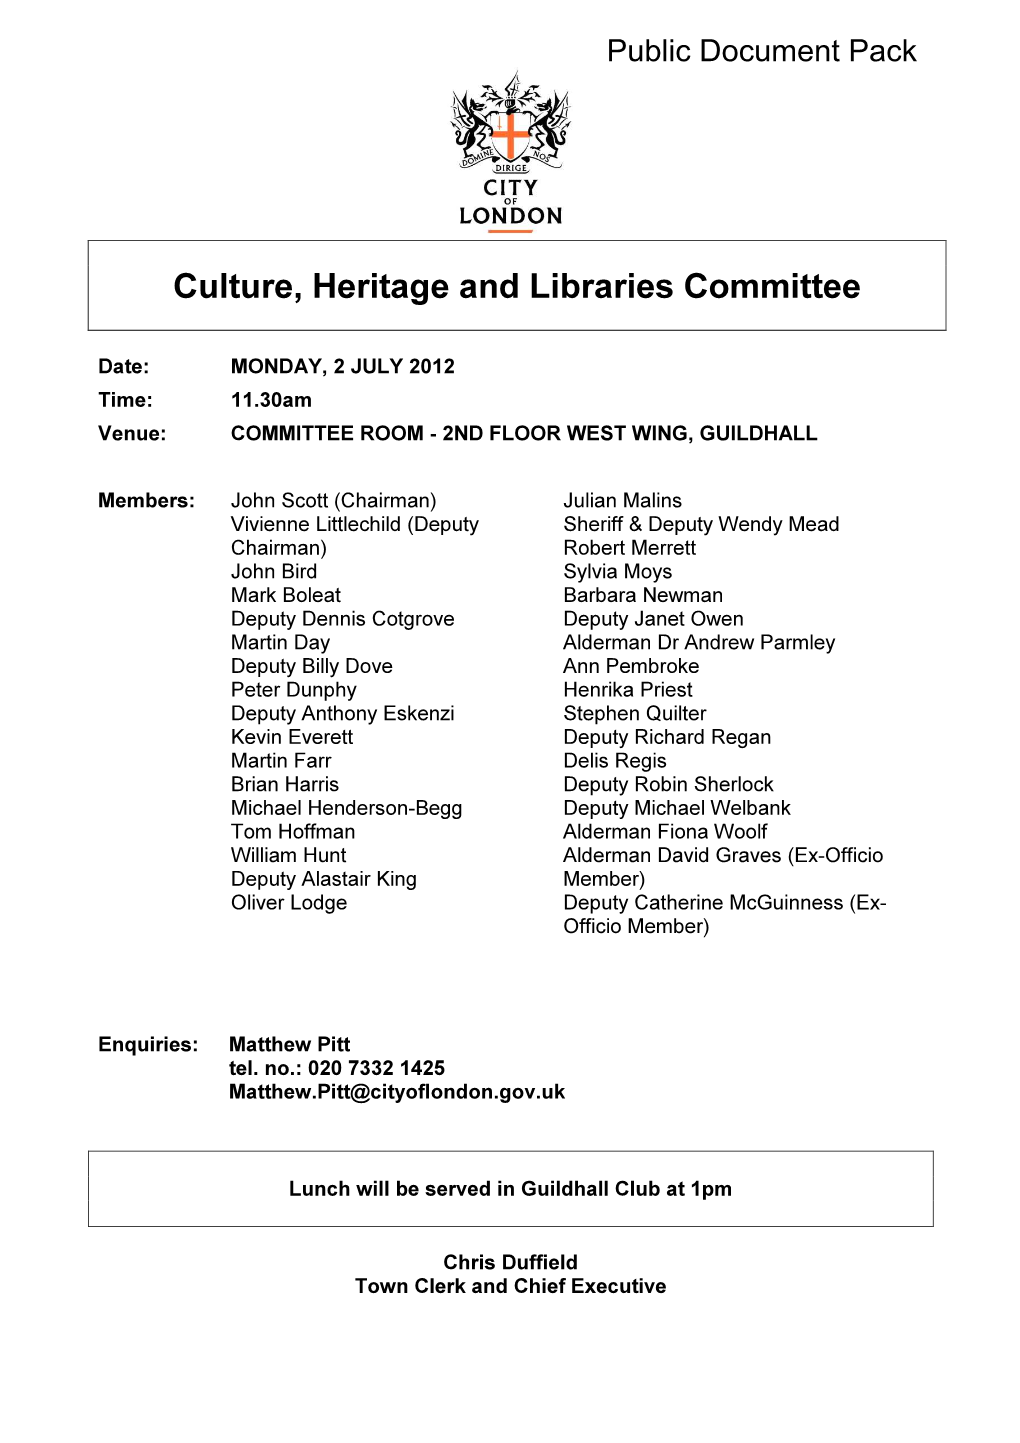 Culture, Heritage and Libraries Committee